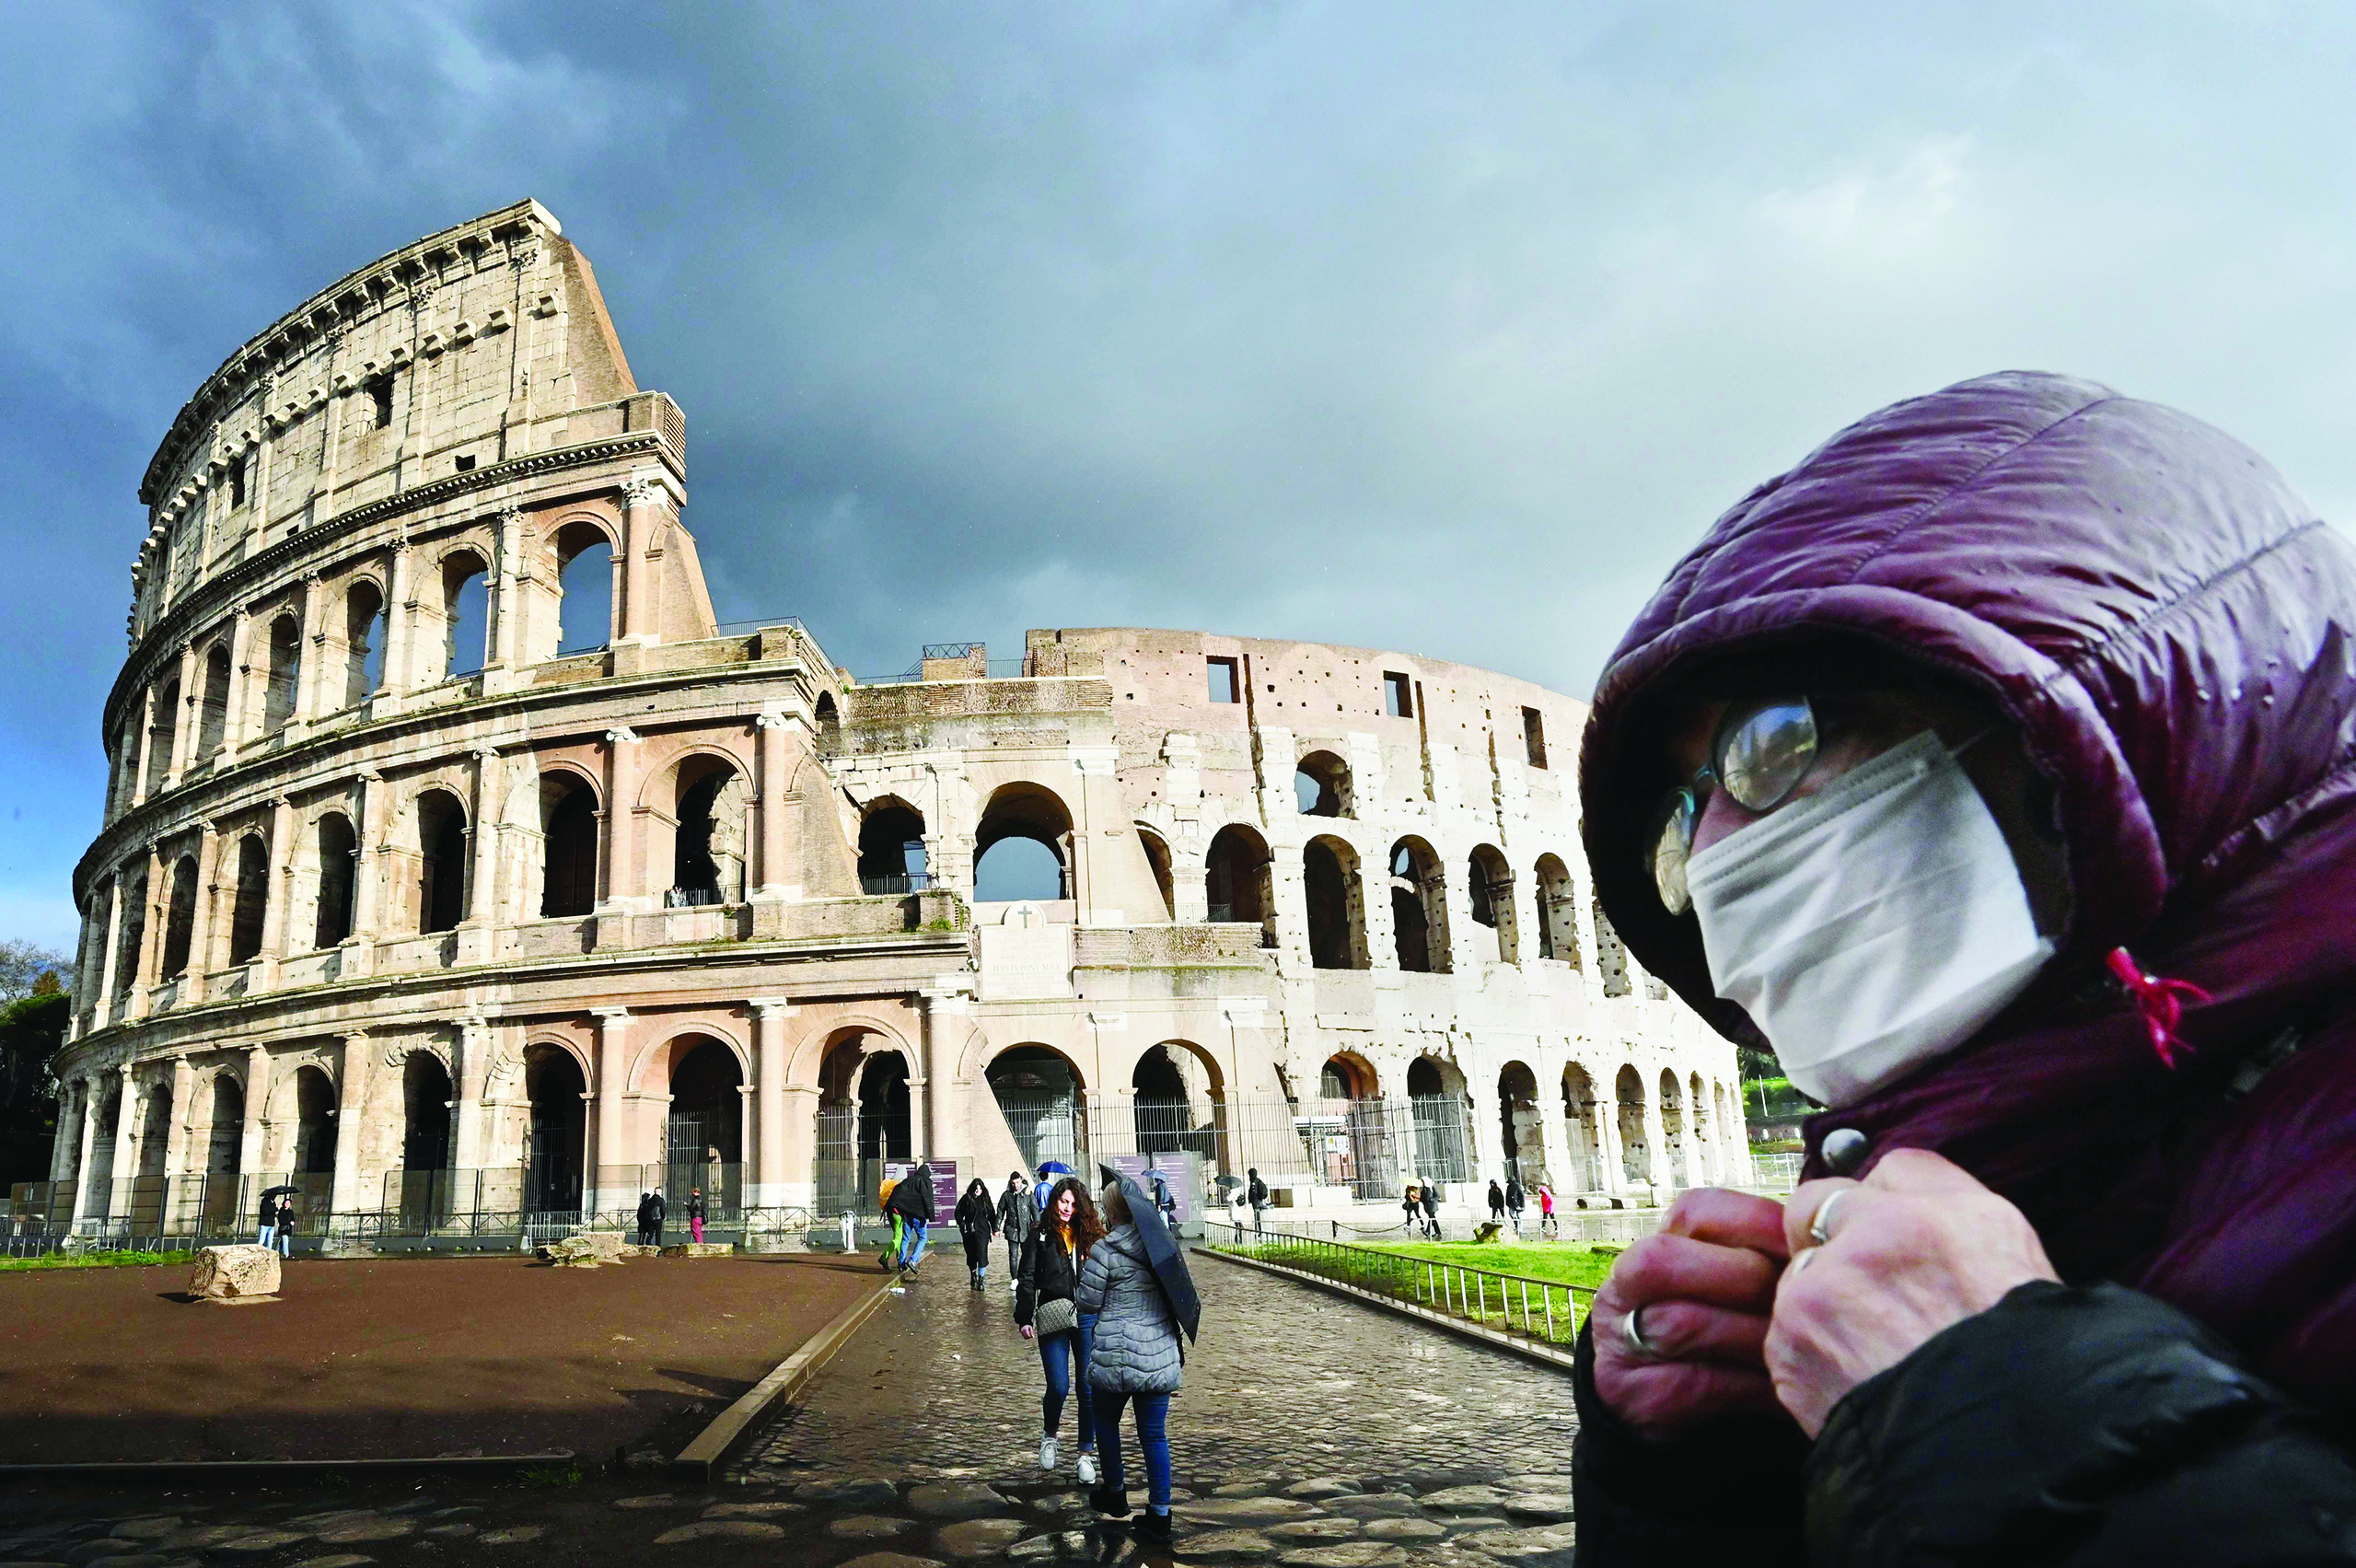 TOPSHOT - A man wearing a protective mask passes by the Coliseum in Rome on March 7, 2020 amid fear of Covid-19 epidemic. - Italy on March 6, 2020 reported 49 more deaths from the new coronavirus, the highest single-day toll to date, bringing the total number of fatalities over the past two weeks to 197. (Photo by Alberto PIZZOLI / AFP)